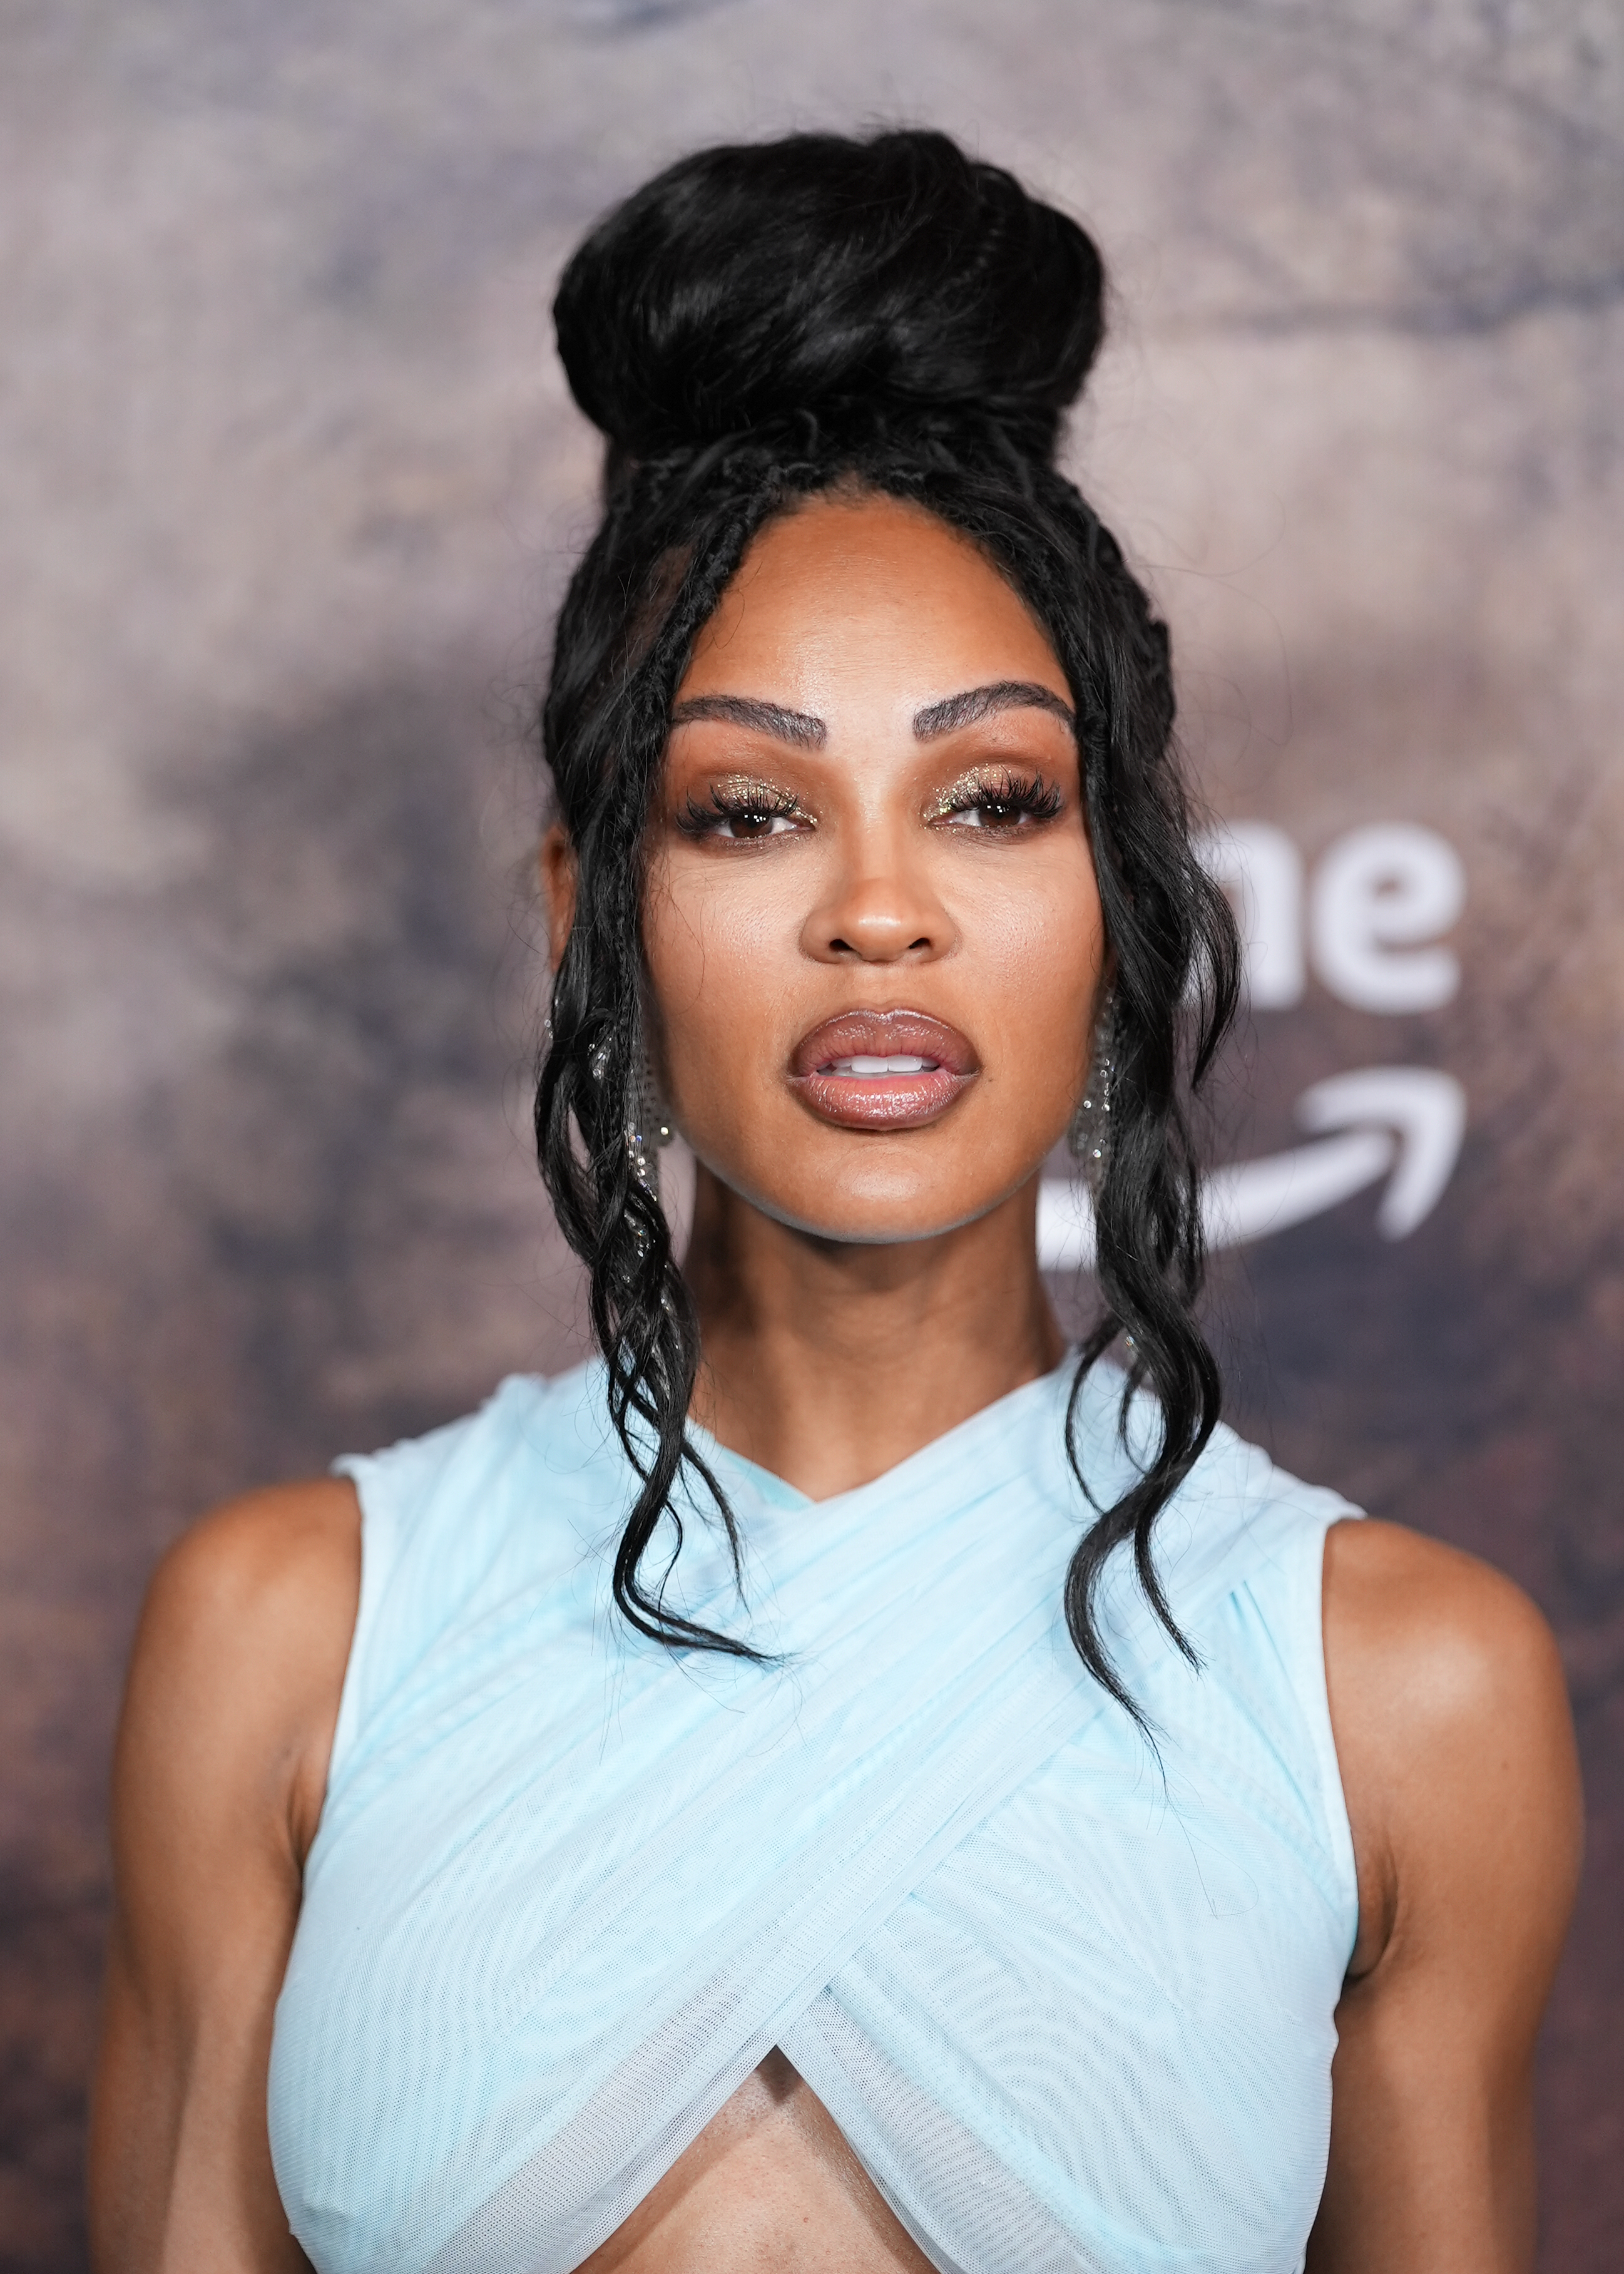 Meagan Good wearing an elegant, sleeveless dress, with an intricate updo hairstyle at a public event